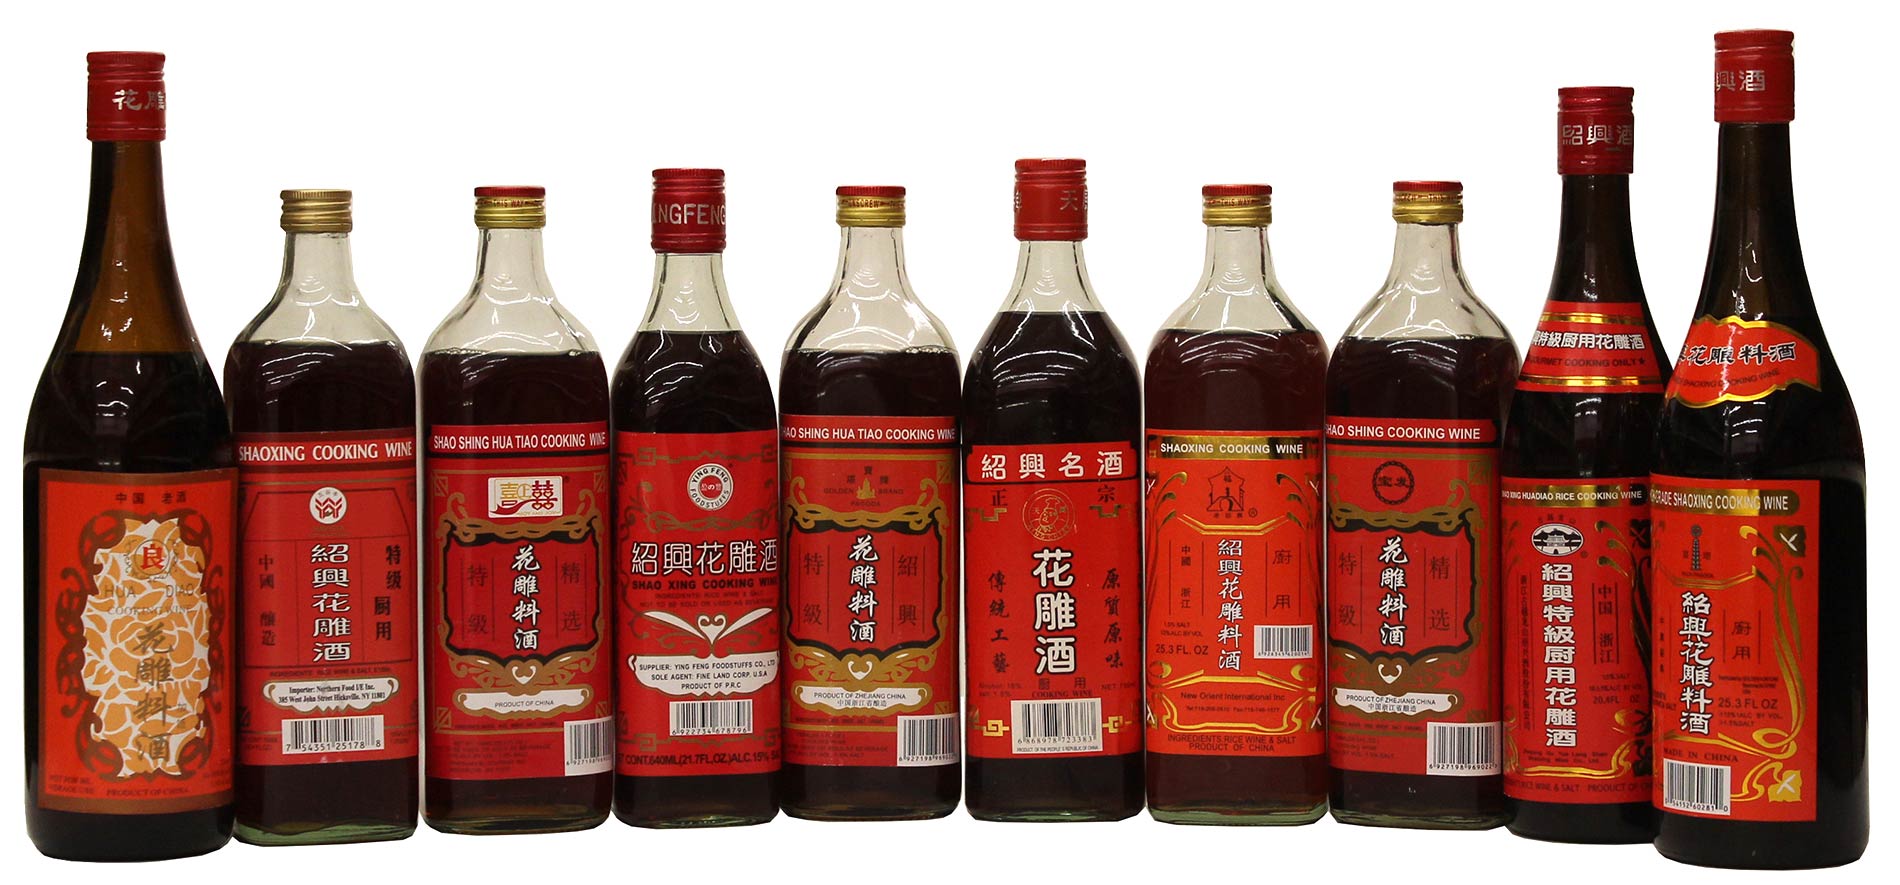 Shao Xing rice cooking wines